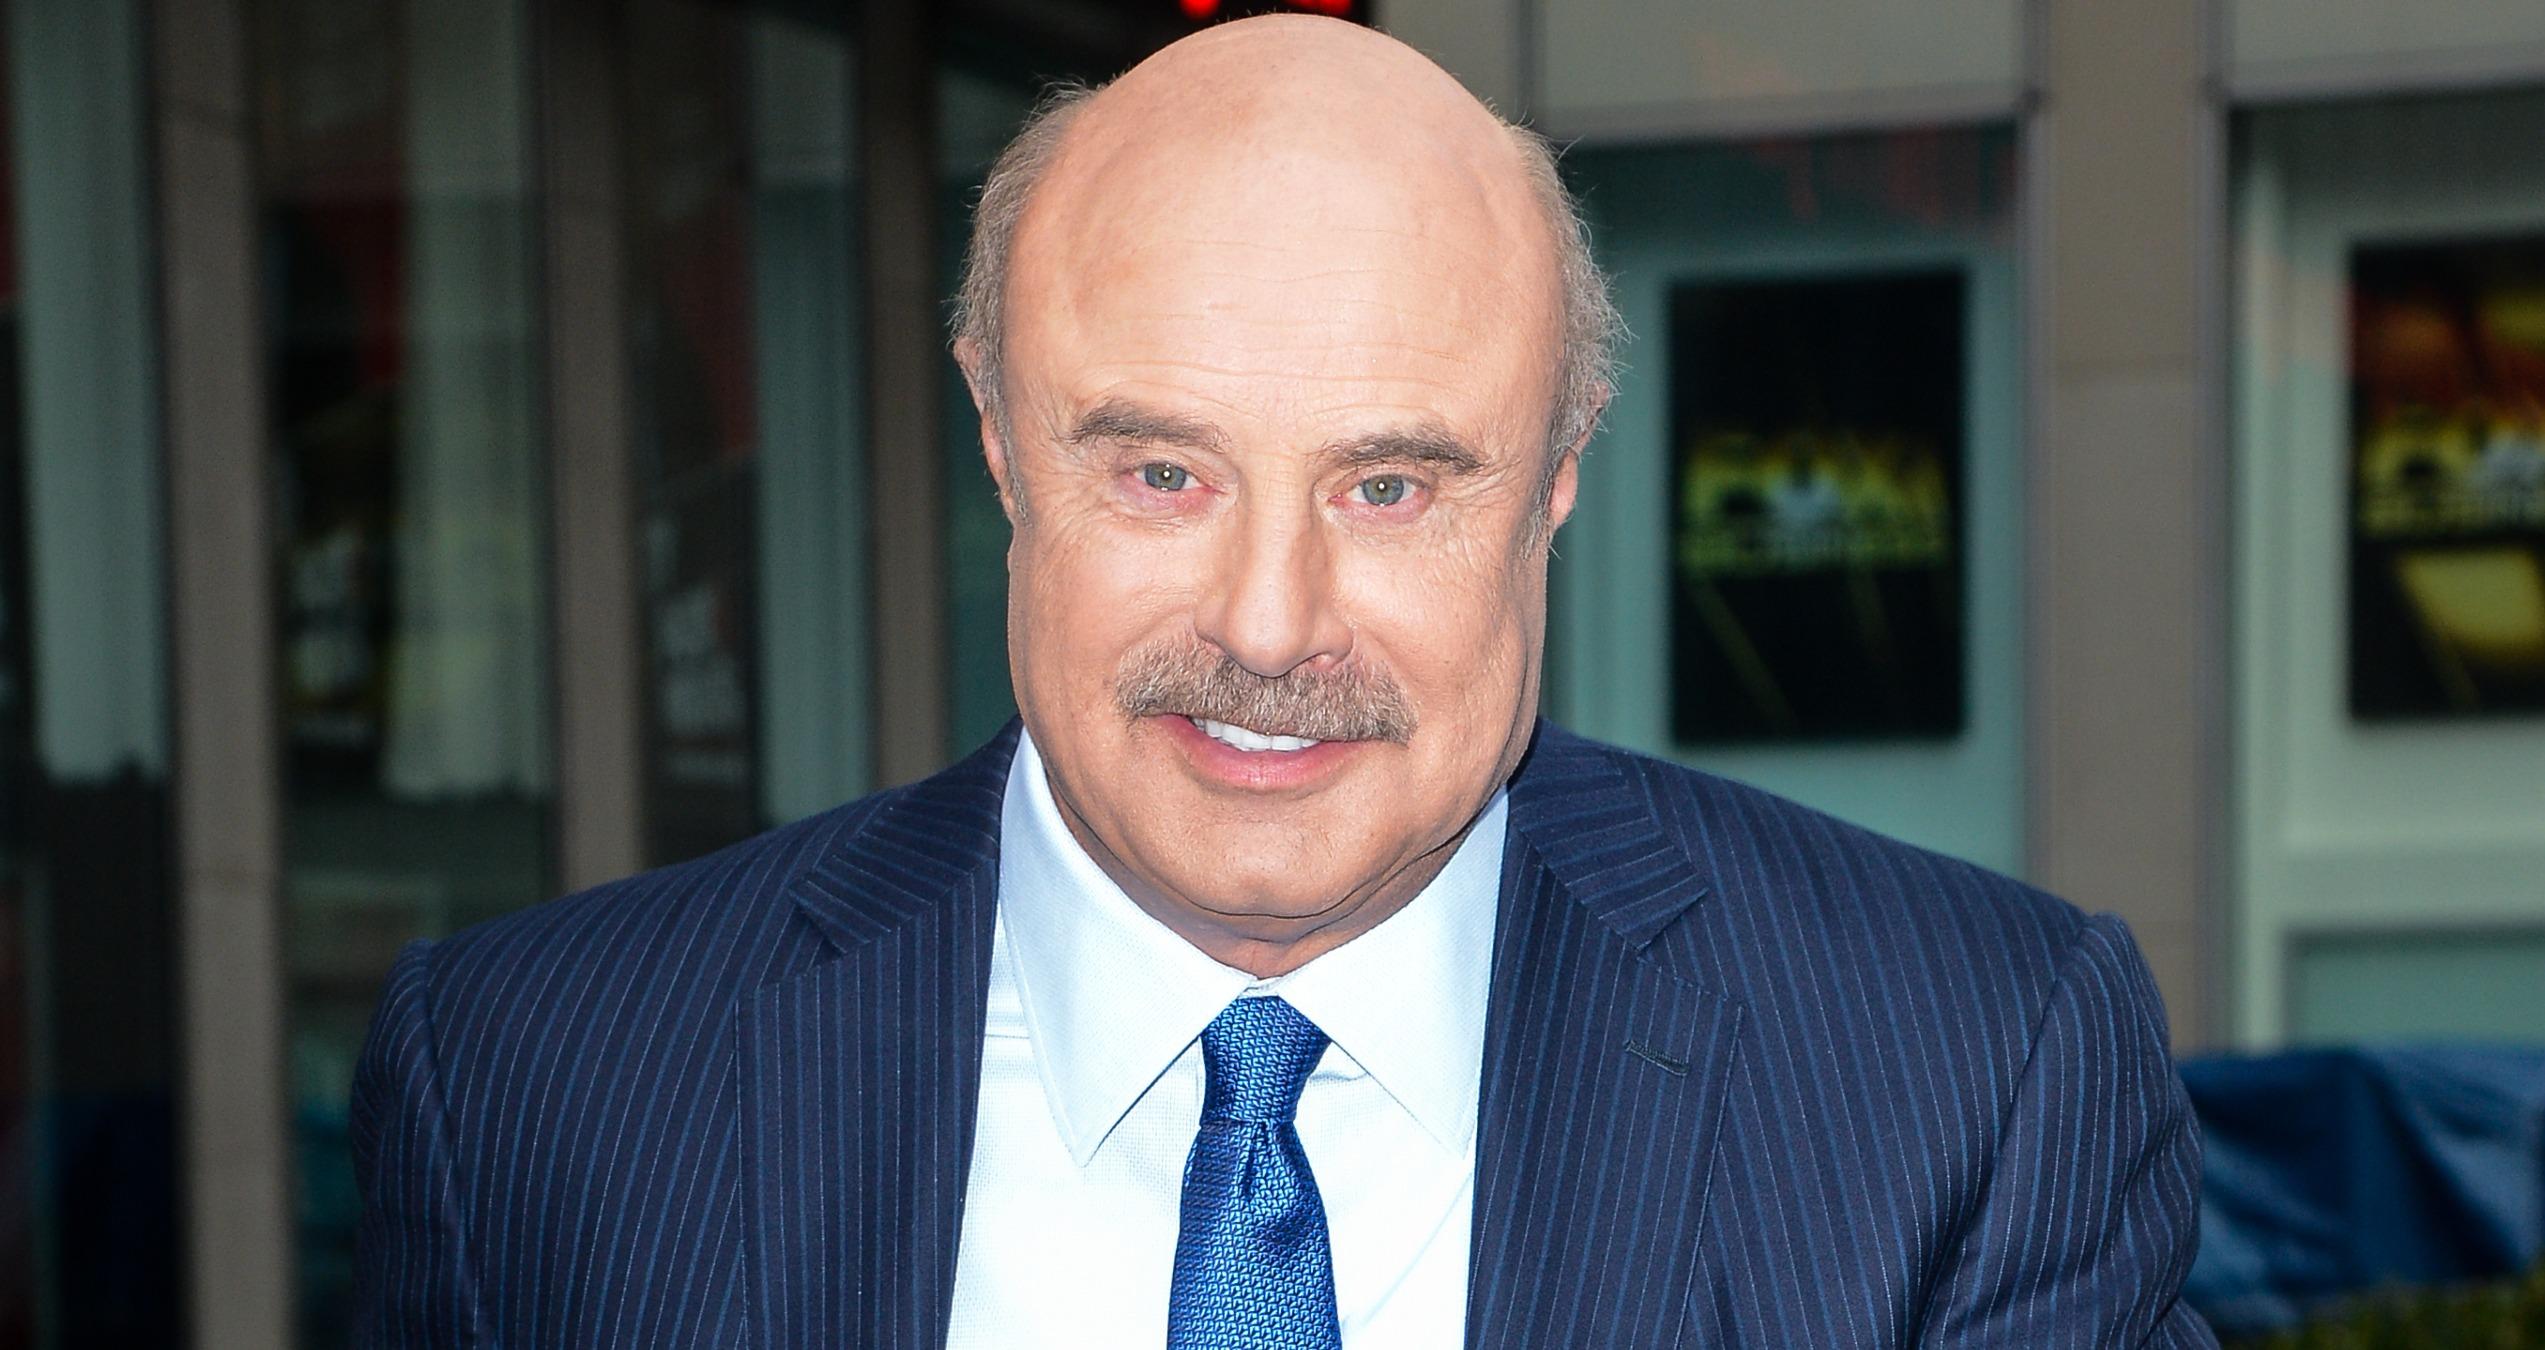  Dr. Phil McGraw leaves the "FOX & Friends" taping